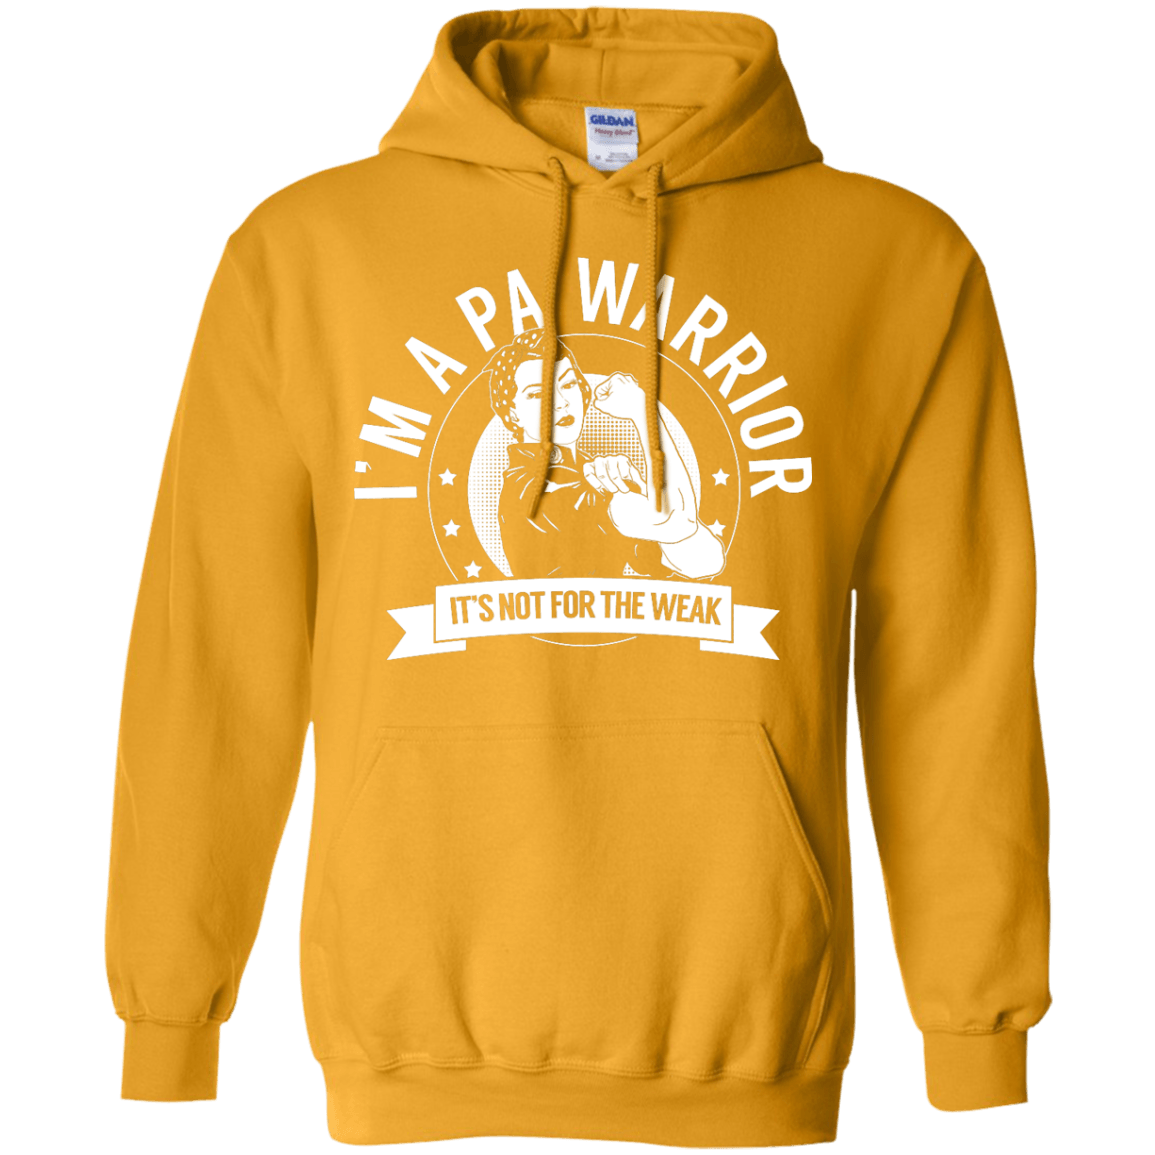 Pernicious Anaemia - PA Warrior Not For The Weak Pullover Hoodie 8 oz - The Unchargeables